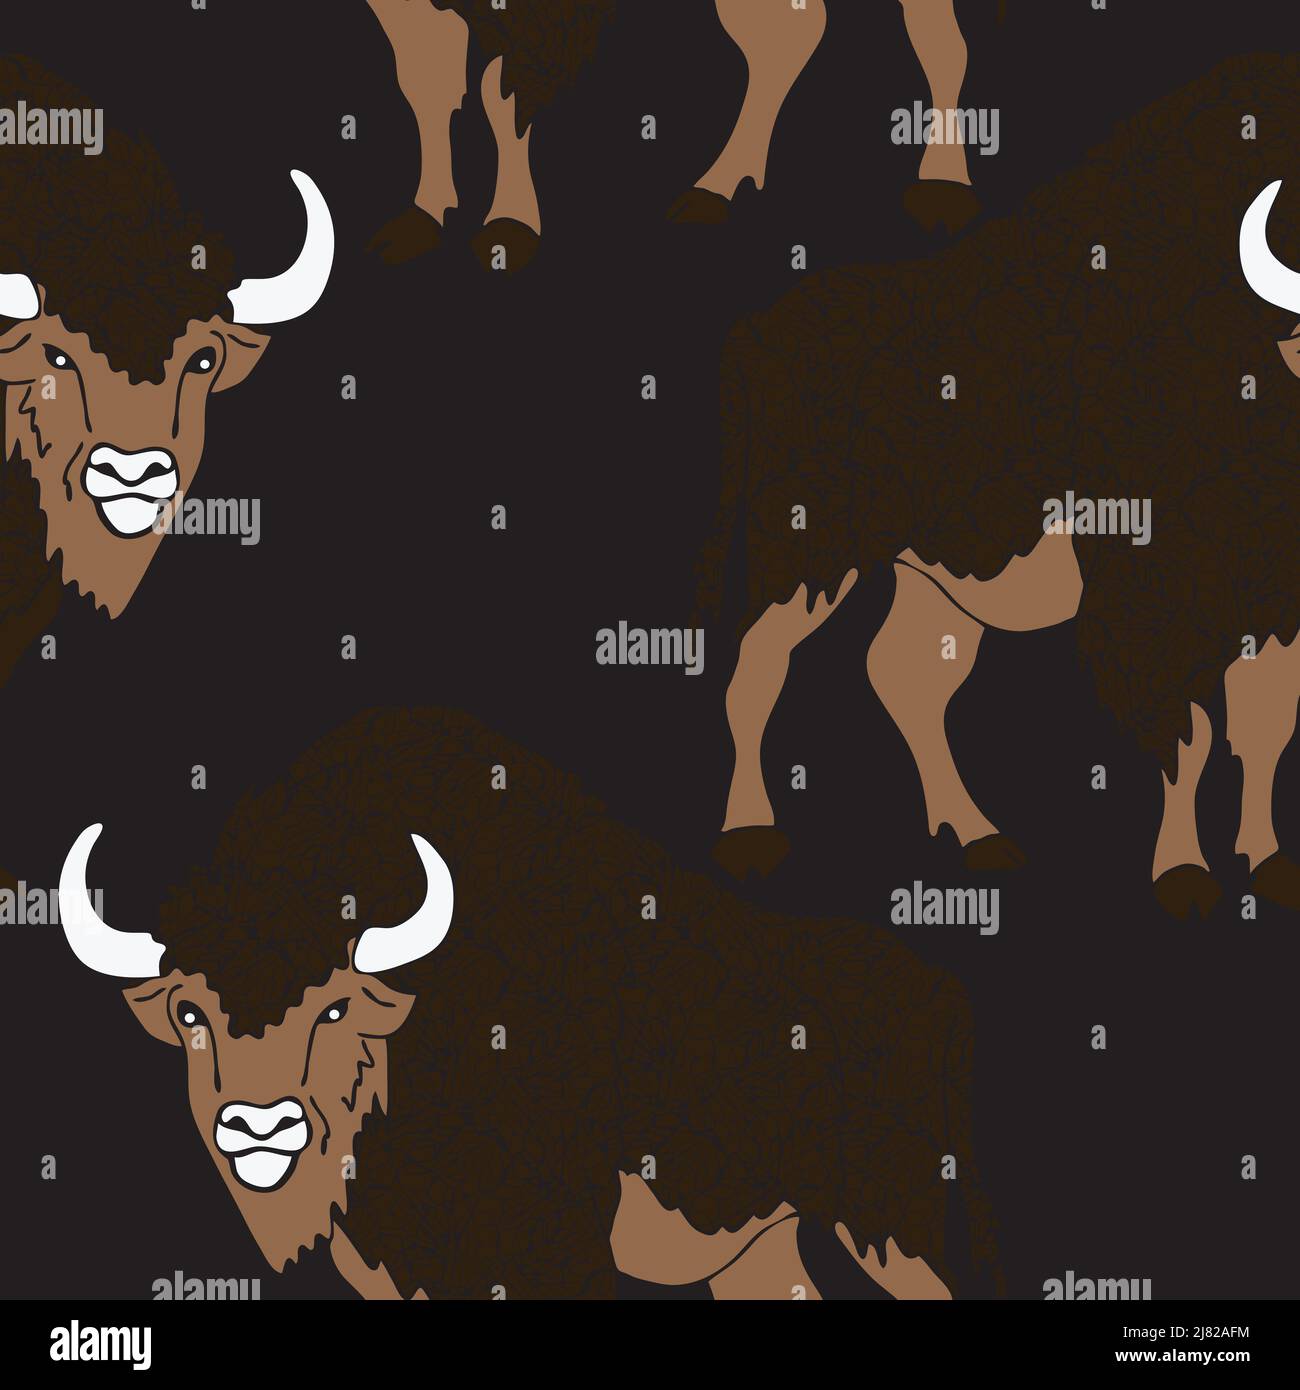 Seamless vector pattern with buffaloes on dark brawn background. Animal bison wallpaper design. Powerful angry Taurus repeat art. Stock Vector